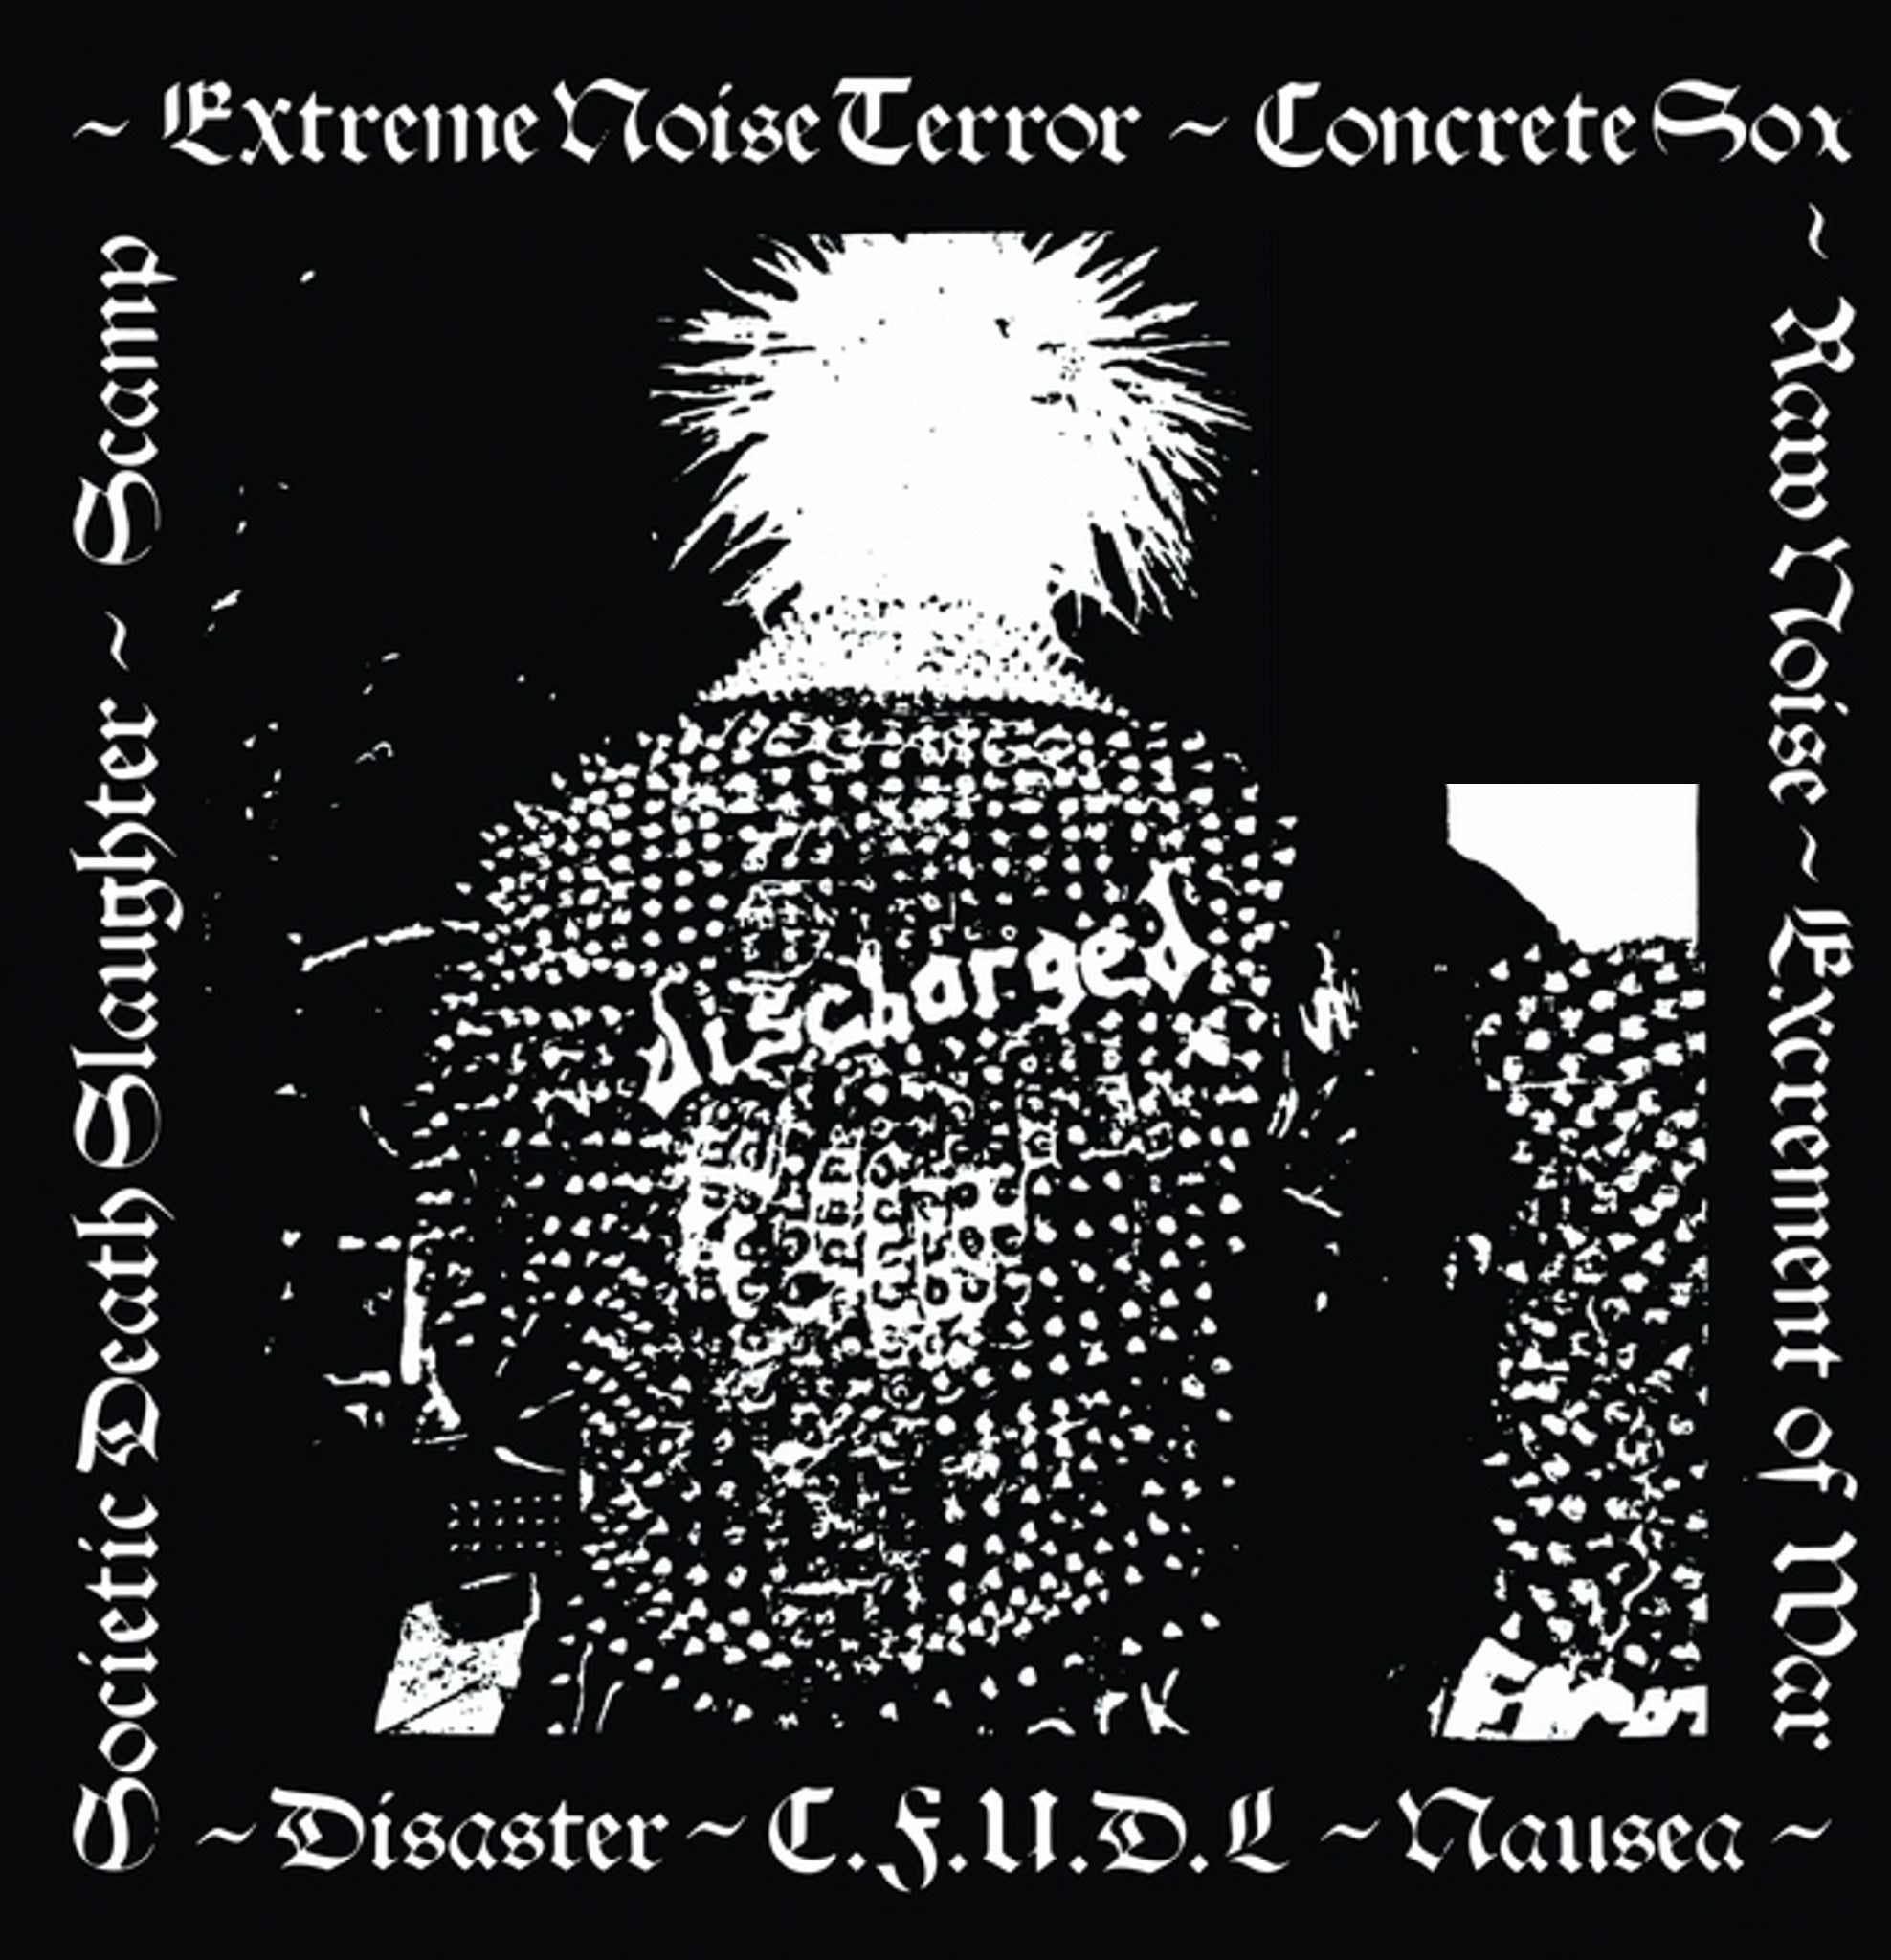 DISORDER - Live In Oslo/Violent World☆Chaos UK Concrete Sox Disclose Kaaos Disgusting Lies Oi Polloi Doom Discharge